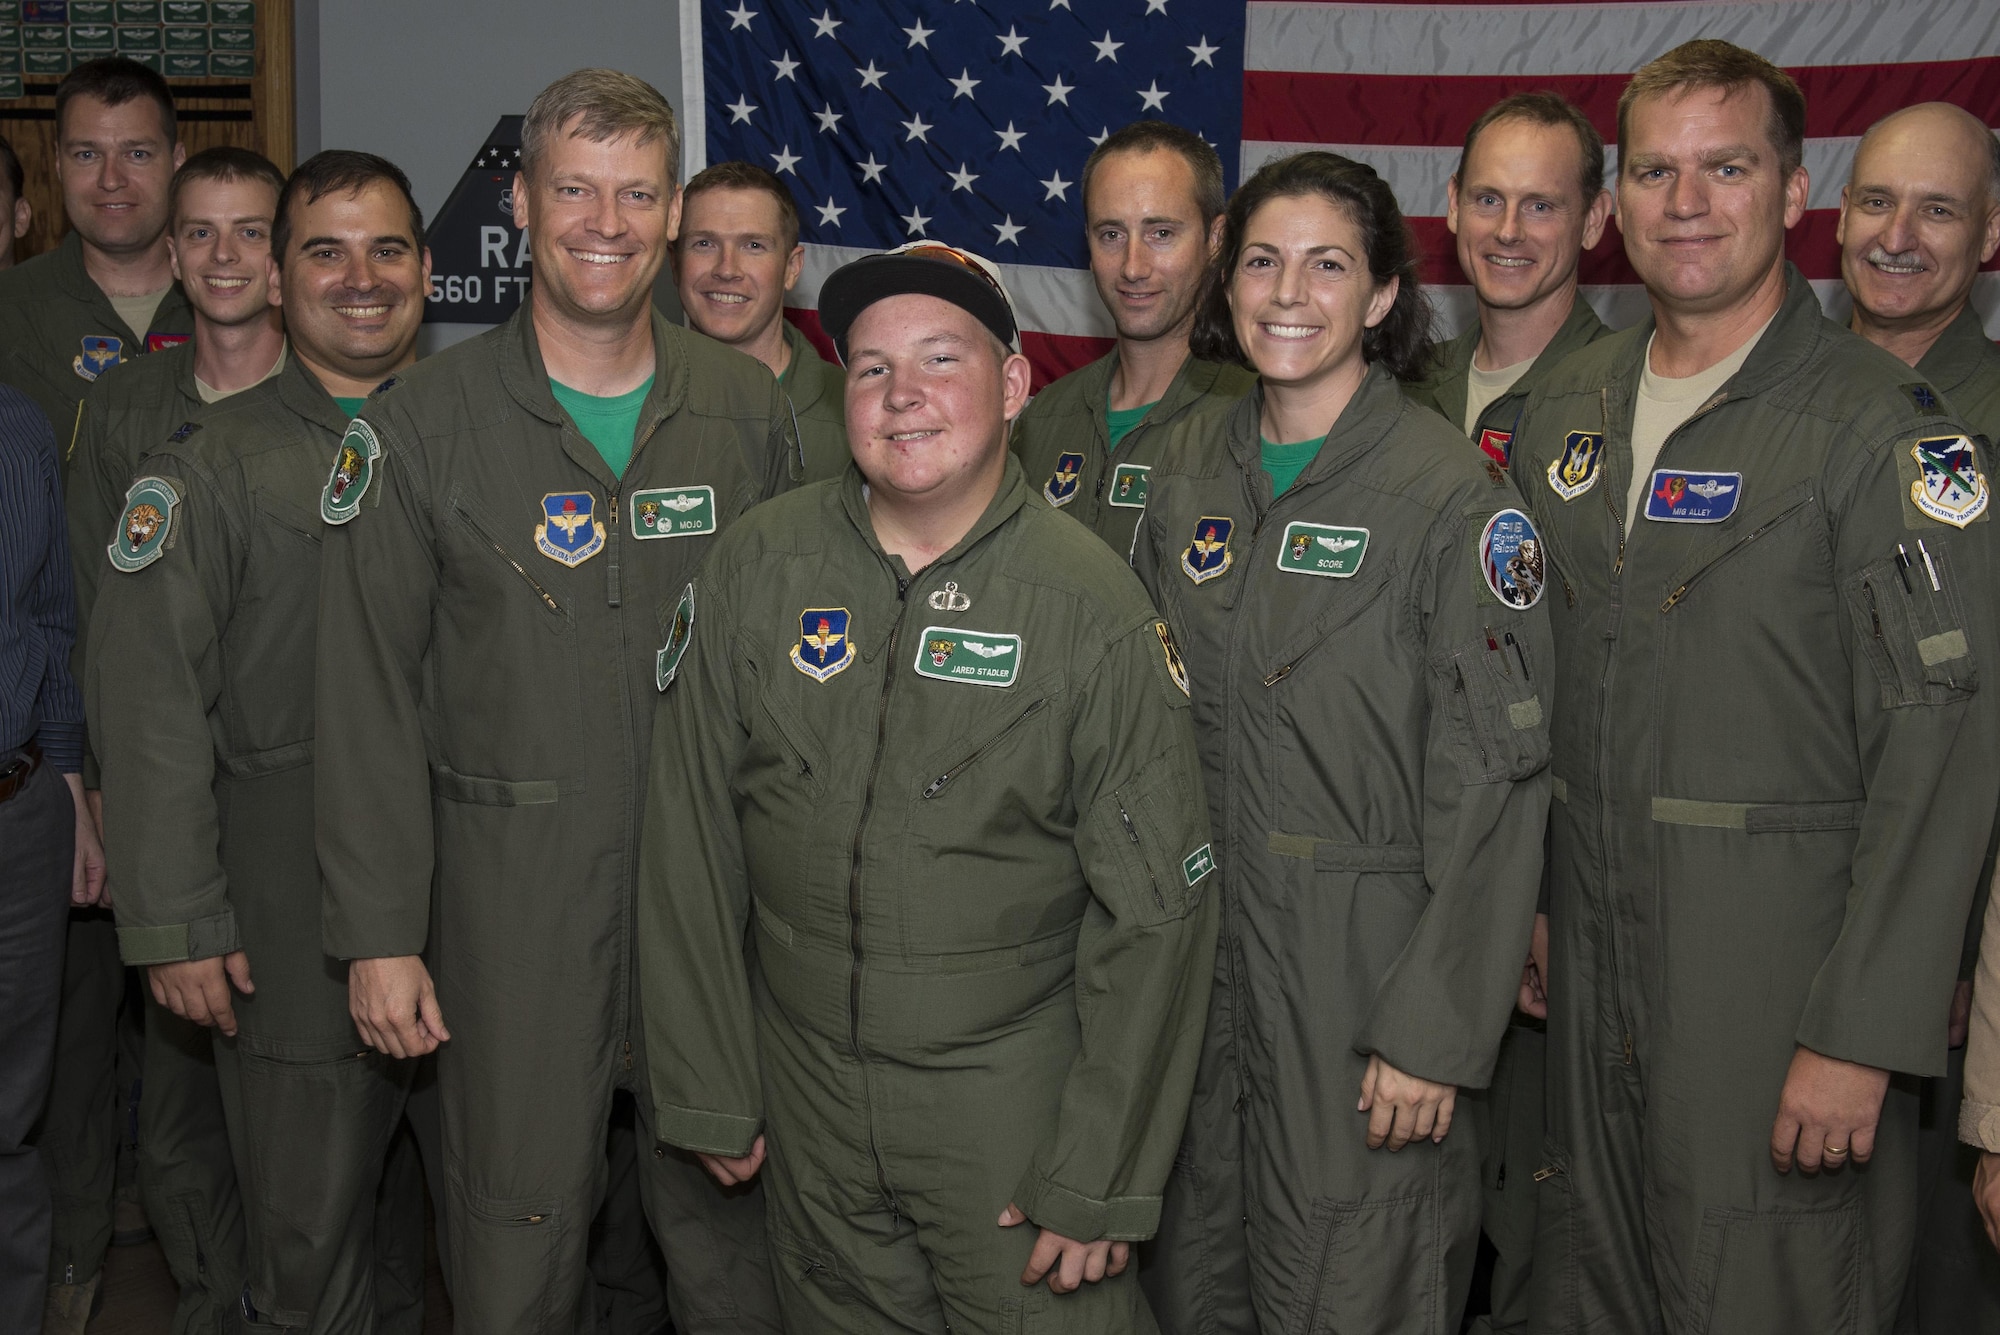 Jared Stadler,560th Flying Training Squadron pilot for a day, stands with members of the 560th FTS July 17, 2015, at Joint Base San Antonio-Randolph. The "Pilot for a Day" program helps give children with chronic illnesses a break from the challenges they face each day by showing them what it is like to be an Air Force pilot.(U.S. Air Force photo by Airman 1st Class Stormy Archer/Released)